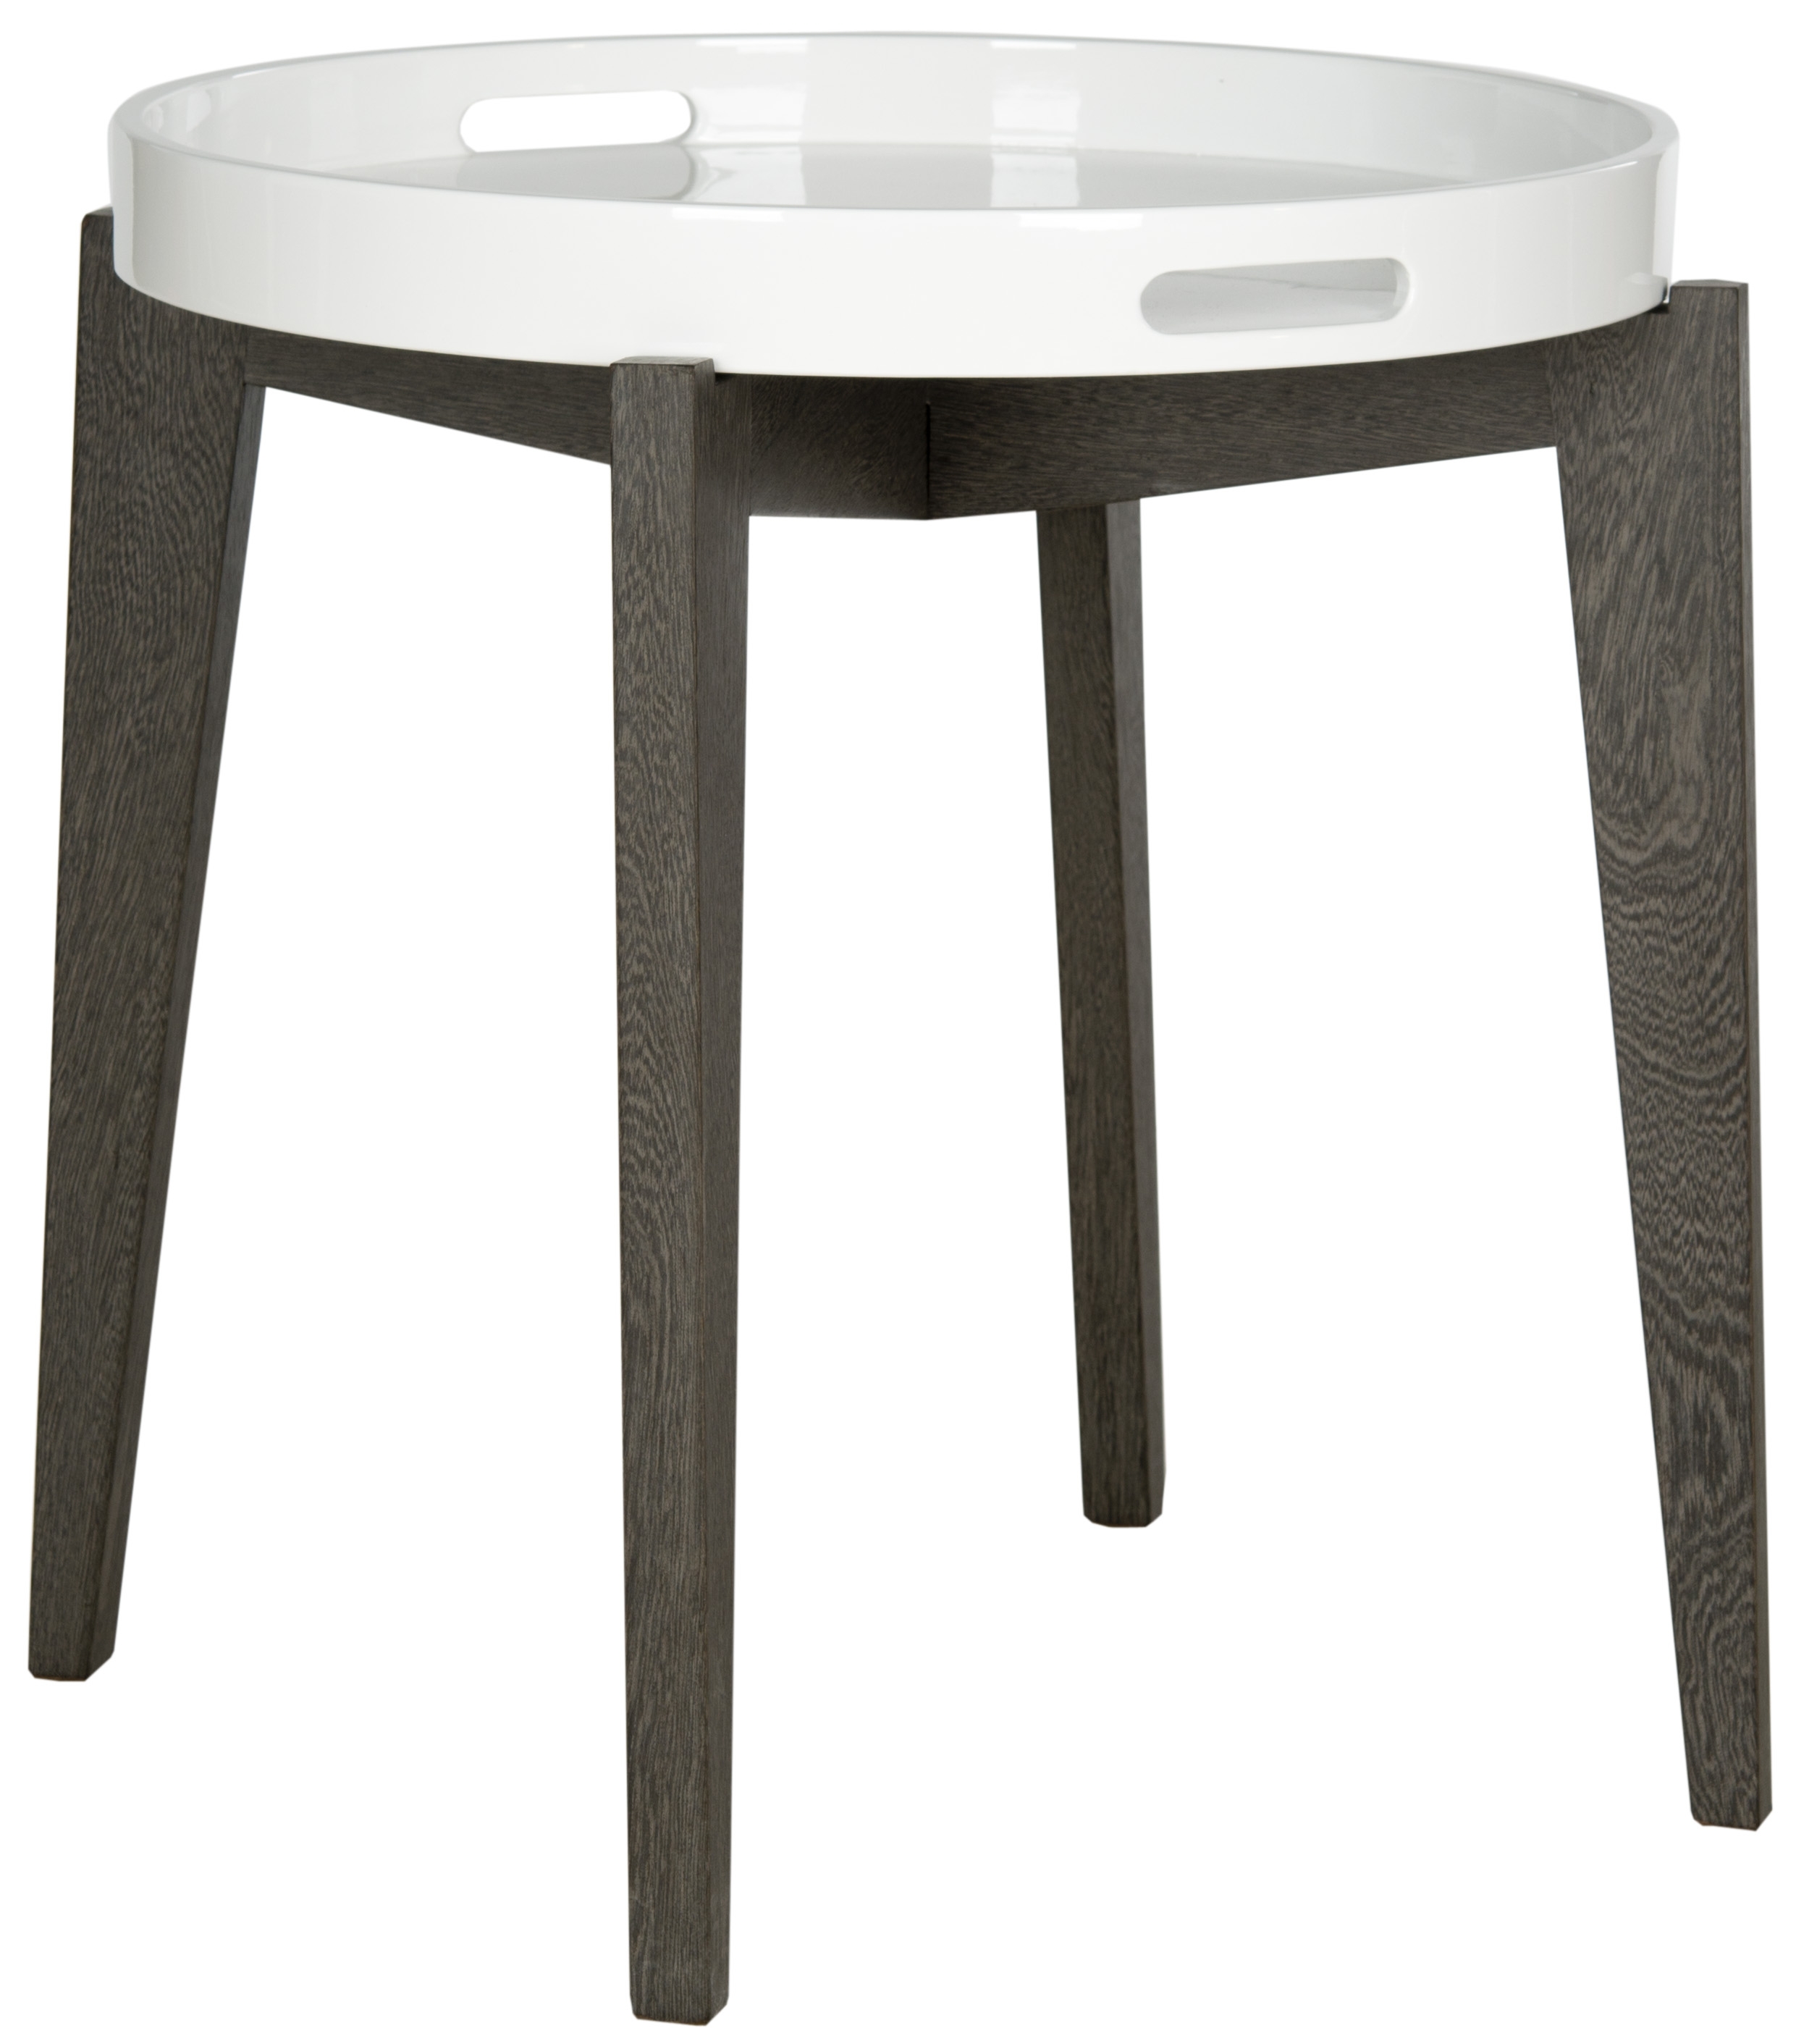 Ben Mid Century Lacquer Tray Top Side Table - White/Brown - Arlo Home - Image 1